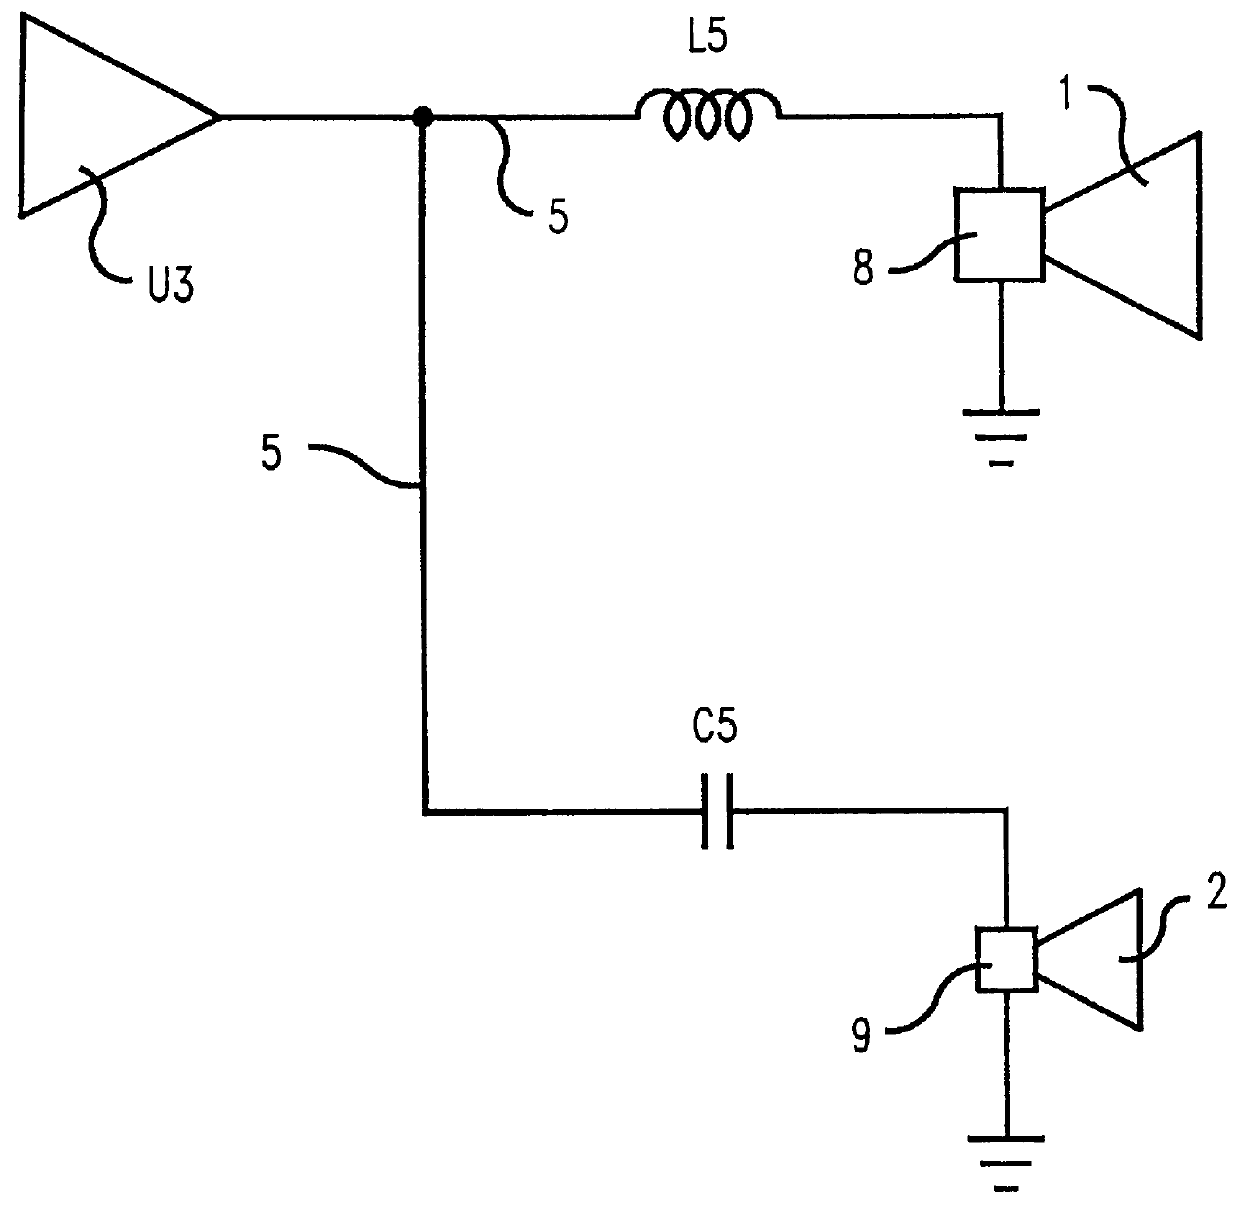 Broadband dc amplifier technique with very low offset voltage